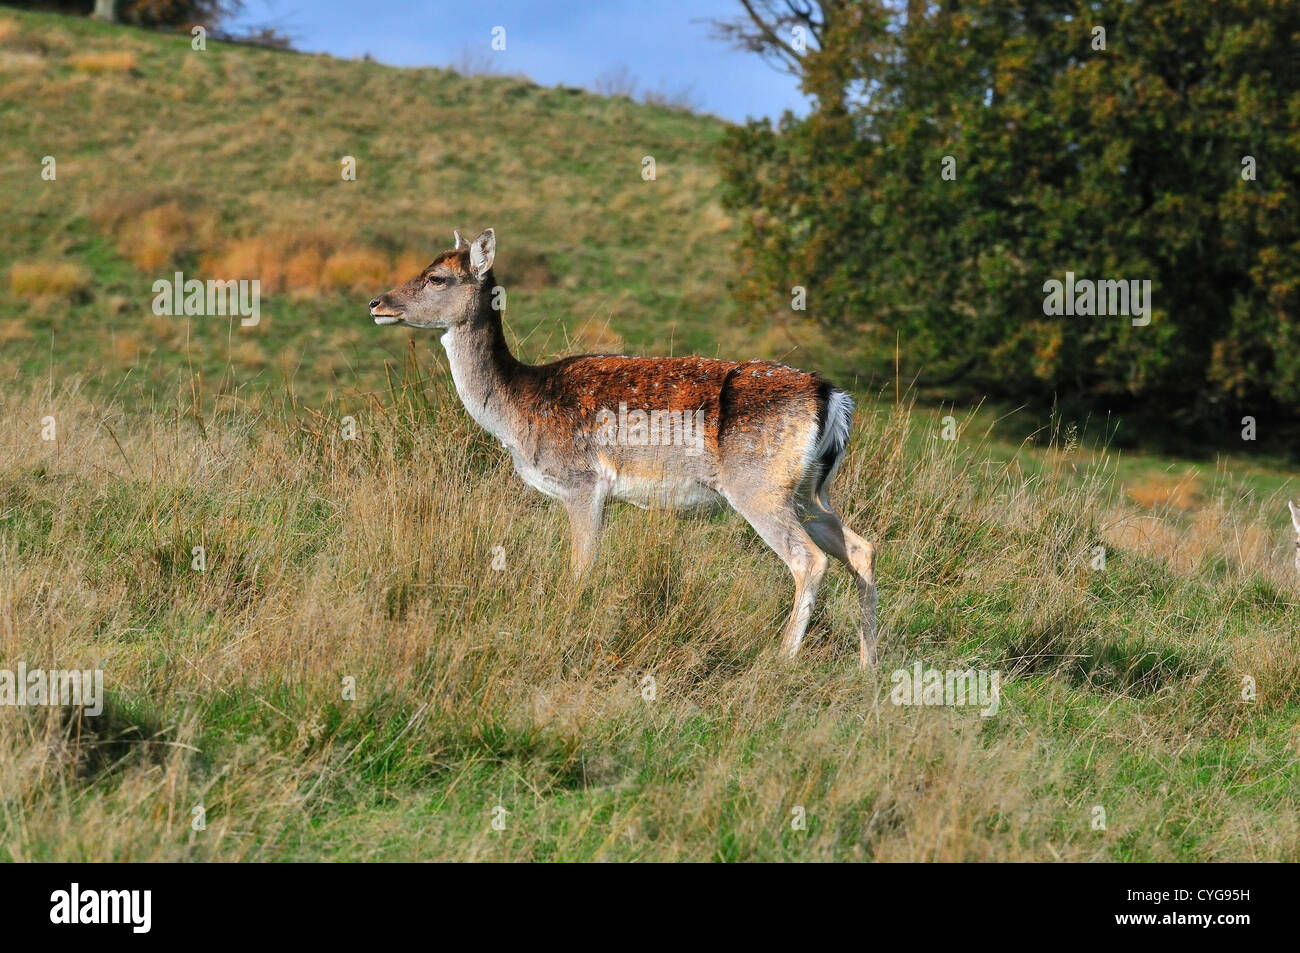 A Fallow deer doe  (dama dama) separated from the herd and the  Fallow deer buck  (nearby )during the rut or mating season Petworth, West Sussex, UK Stock Photo